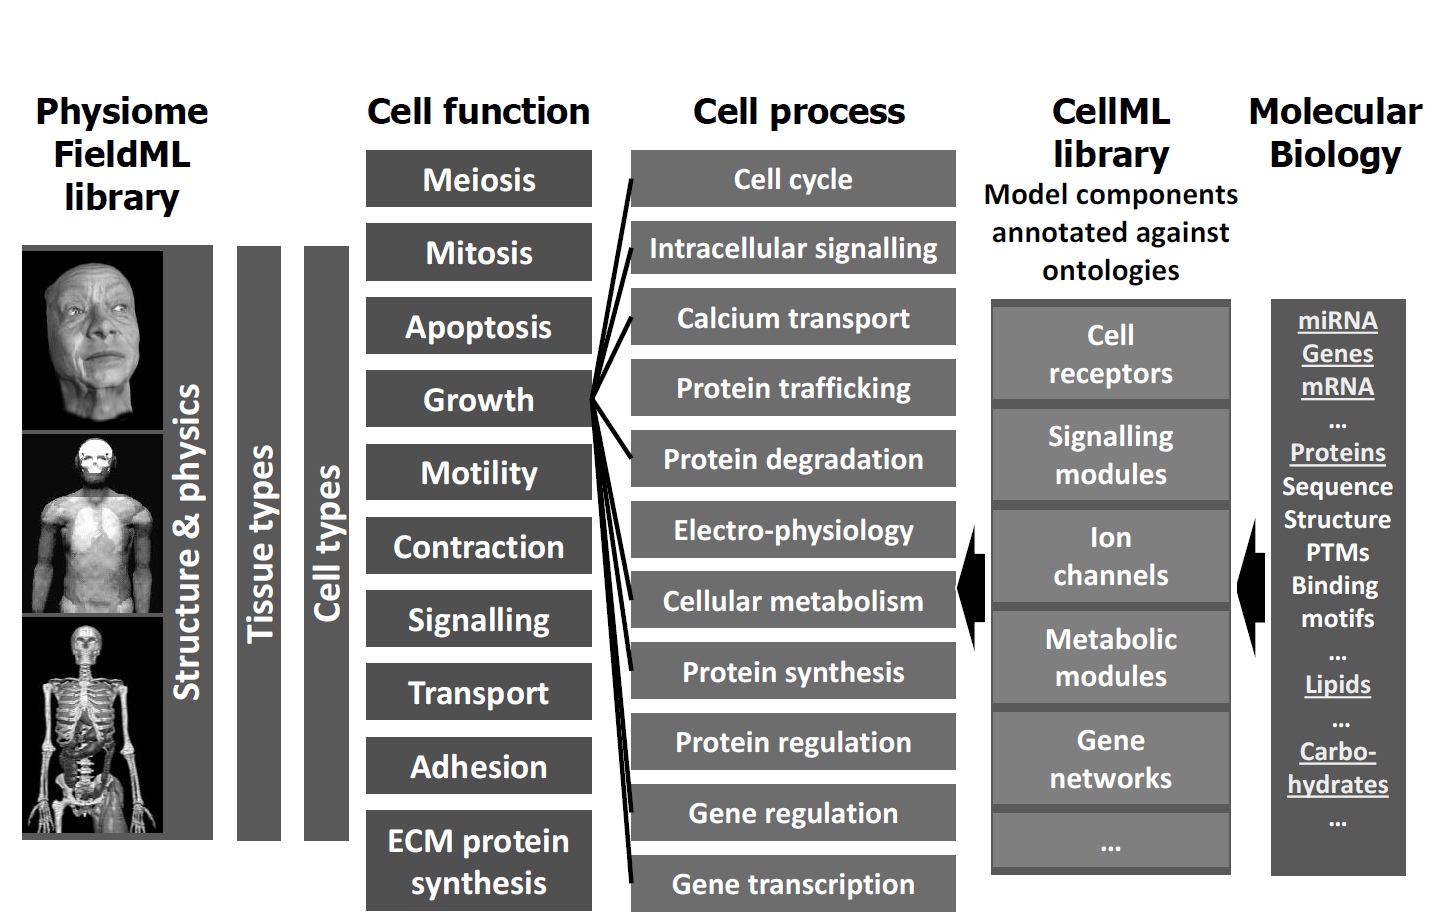 Infrastructure for linking molecular biology to physiome